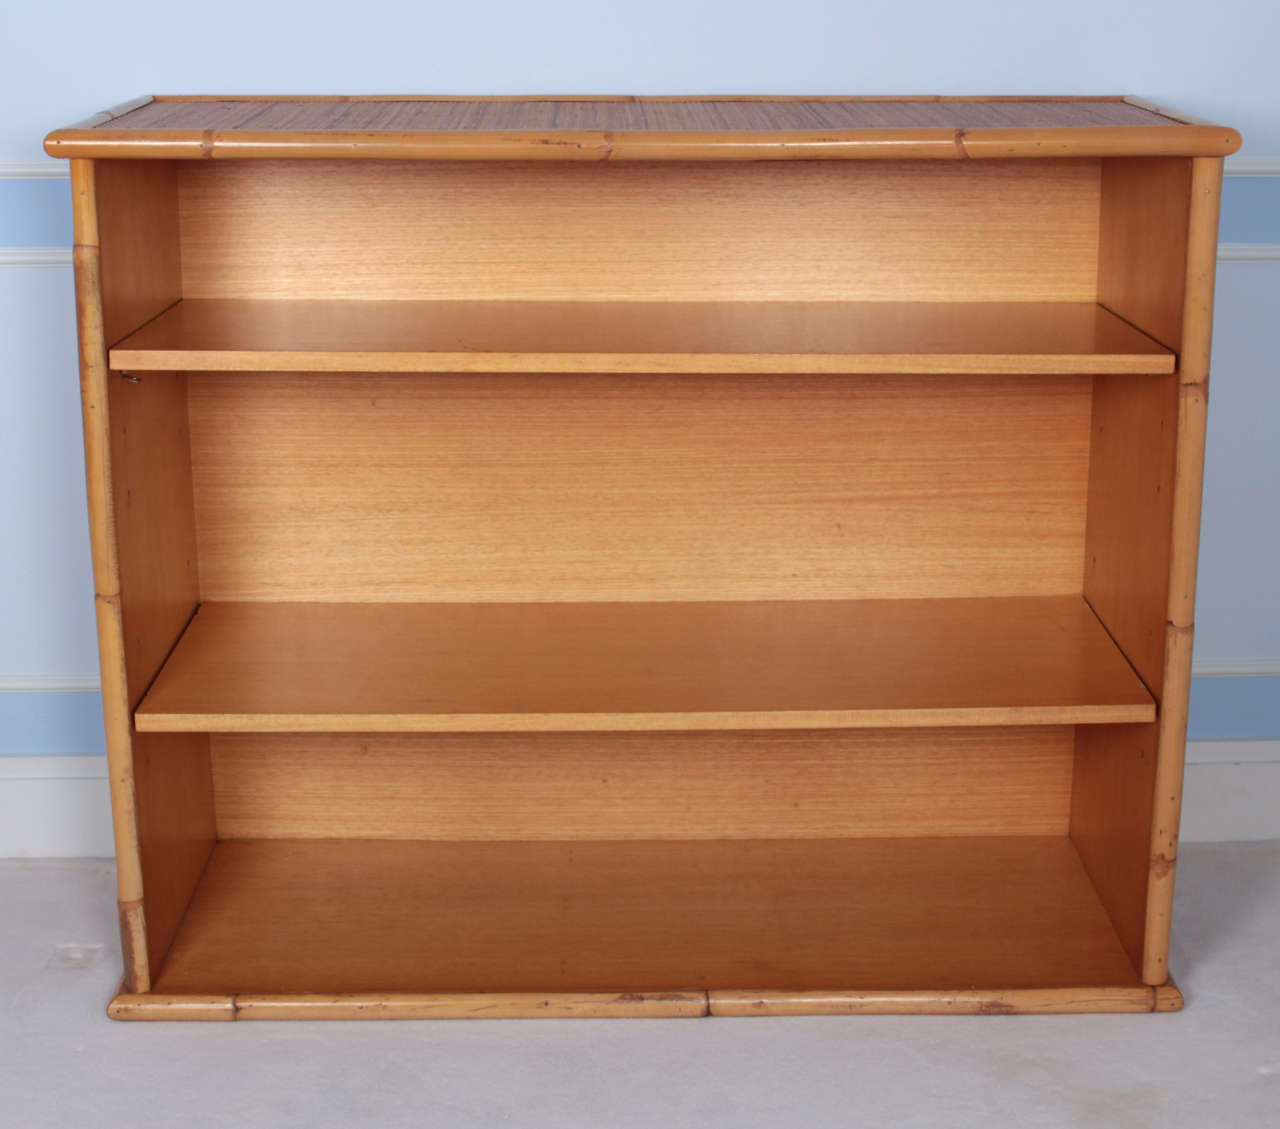 Pair of low and wide bookcases with fixed shelves, bamboo frames, rattan panels on sides and top.